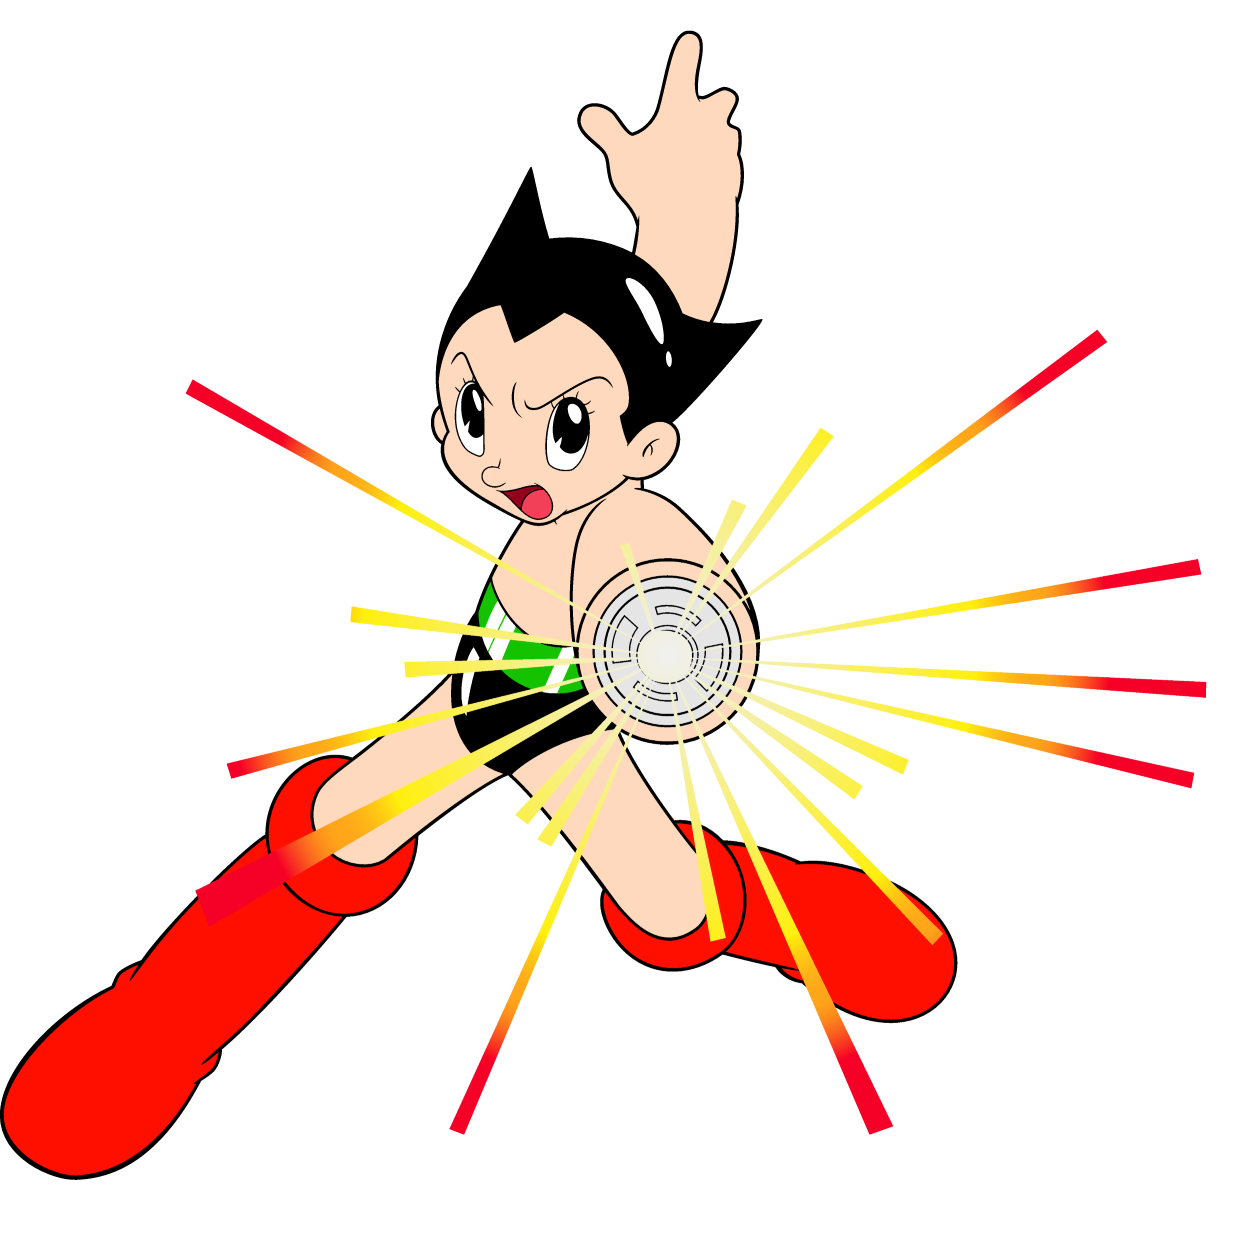 Pchat - Astro Boy by paxiti P